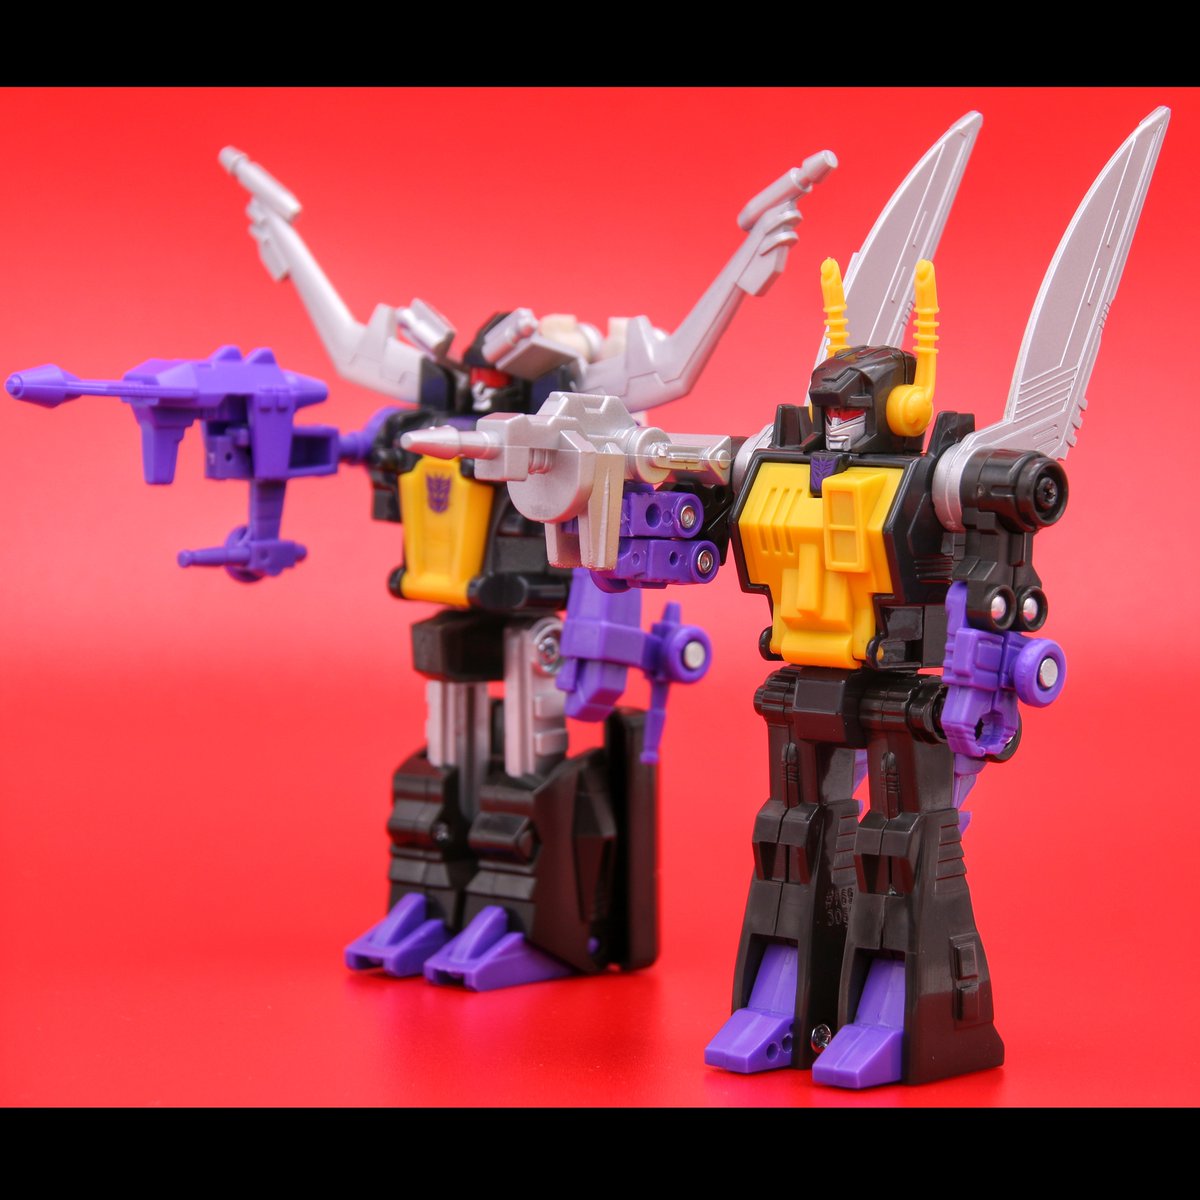 Retro Insecticons!

#transformers #toyphotography